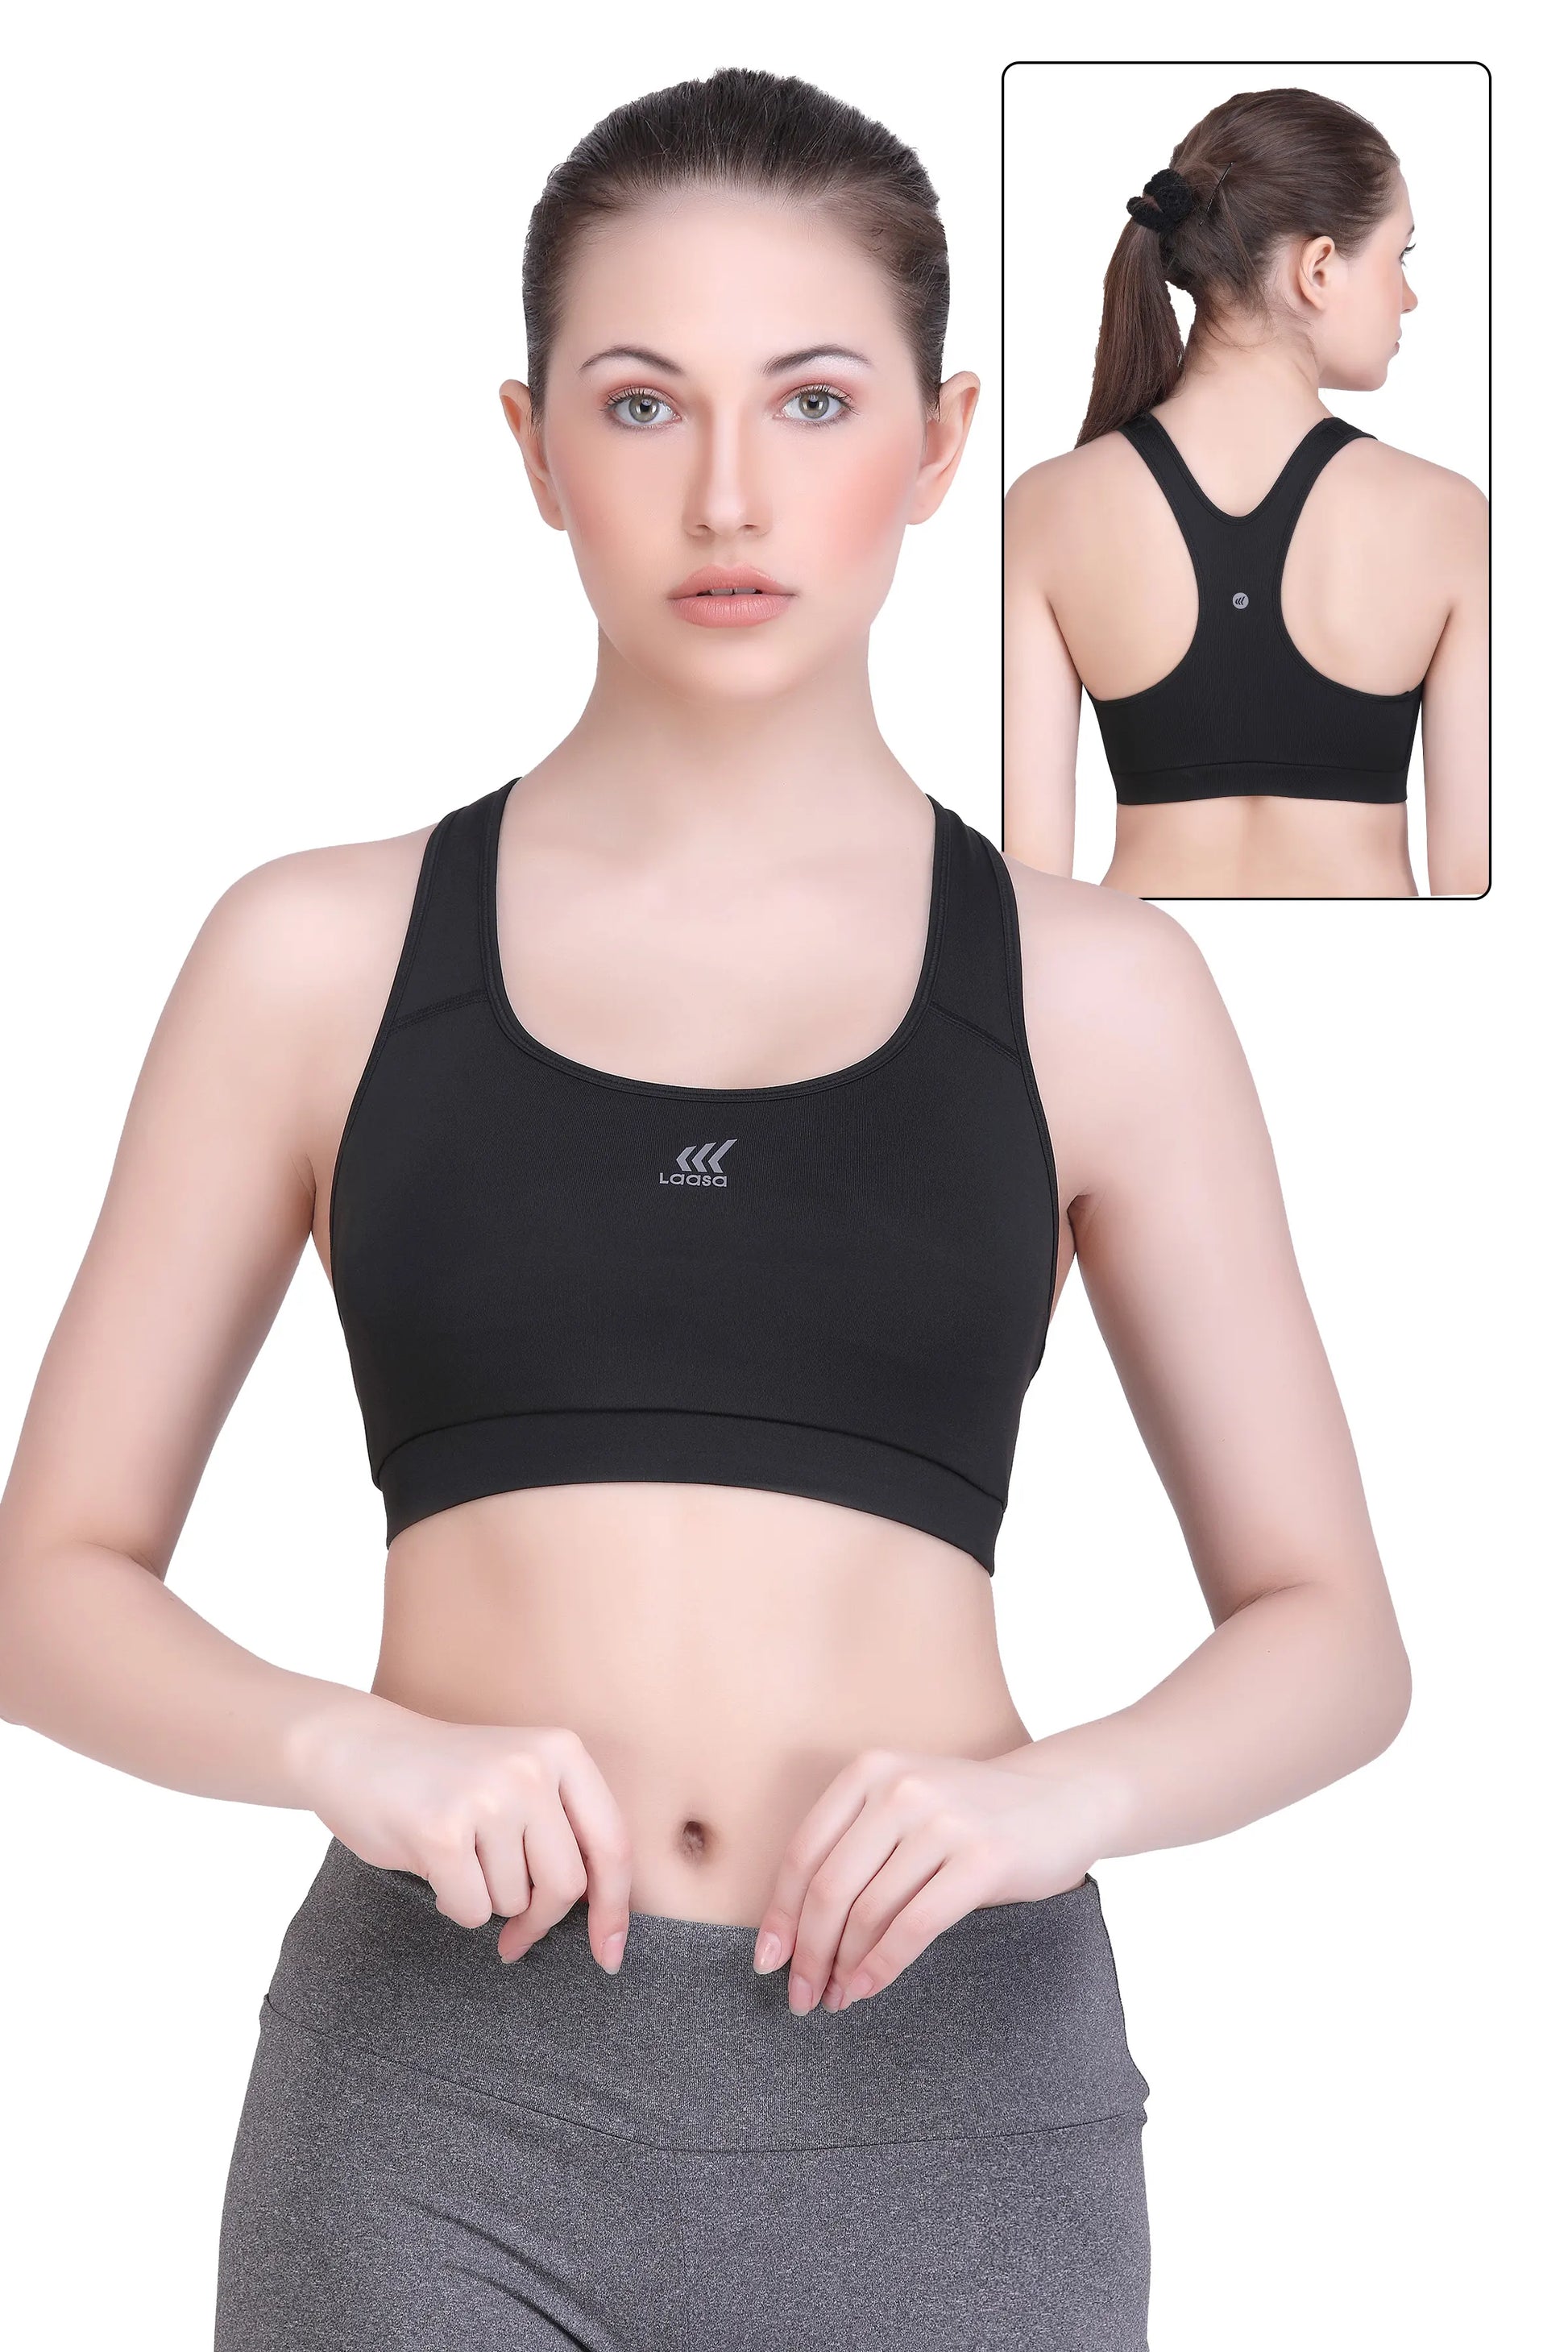 Women's Longline Sports Bra: Support Your Curves, Unleash Your Moves –  Laasa Sports